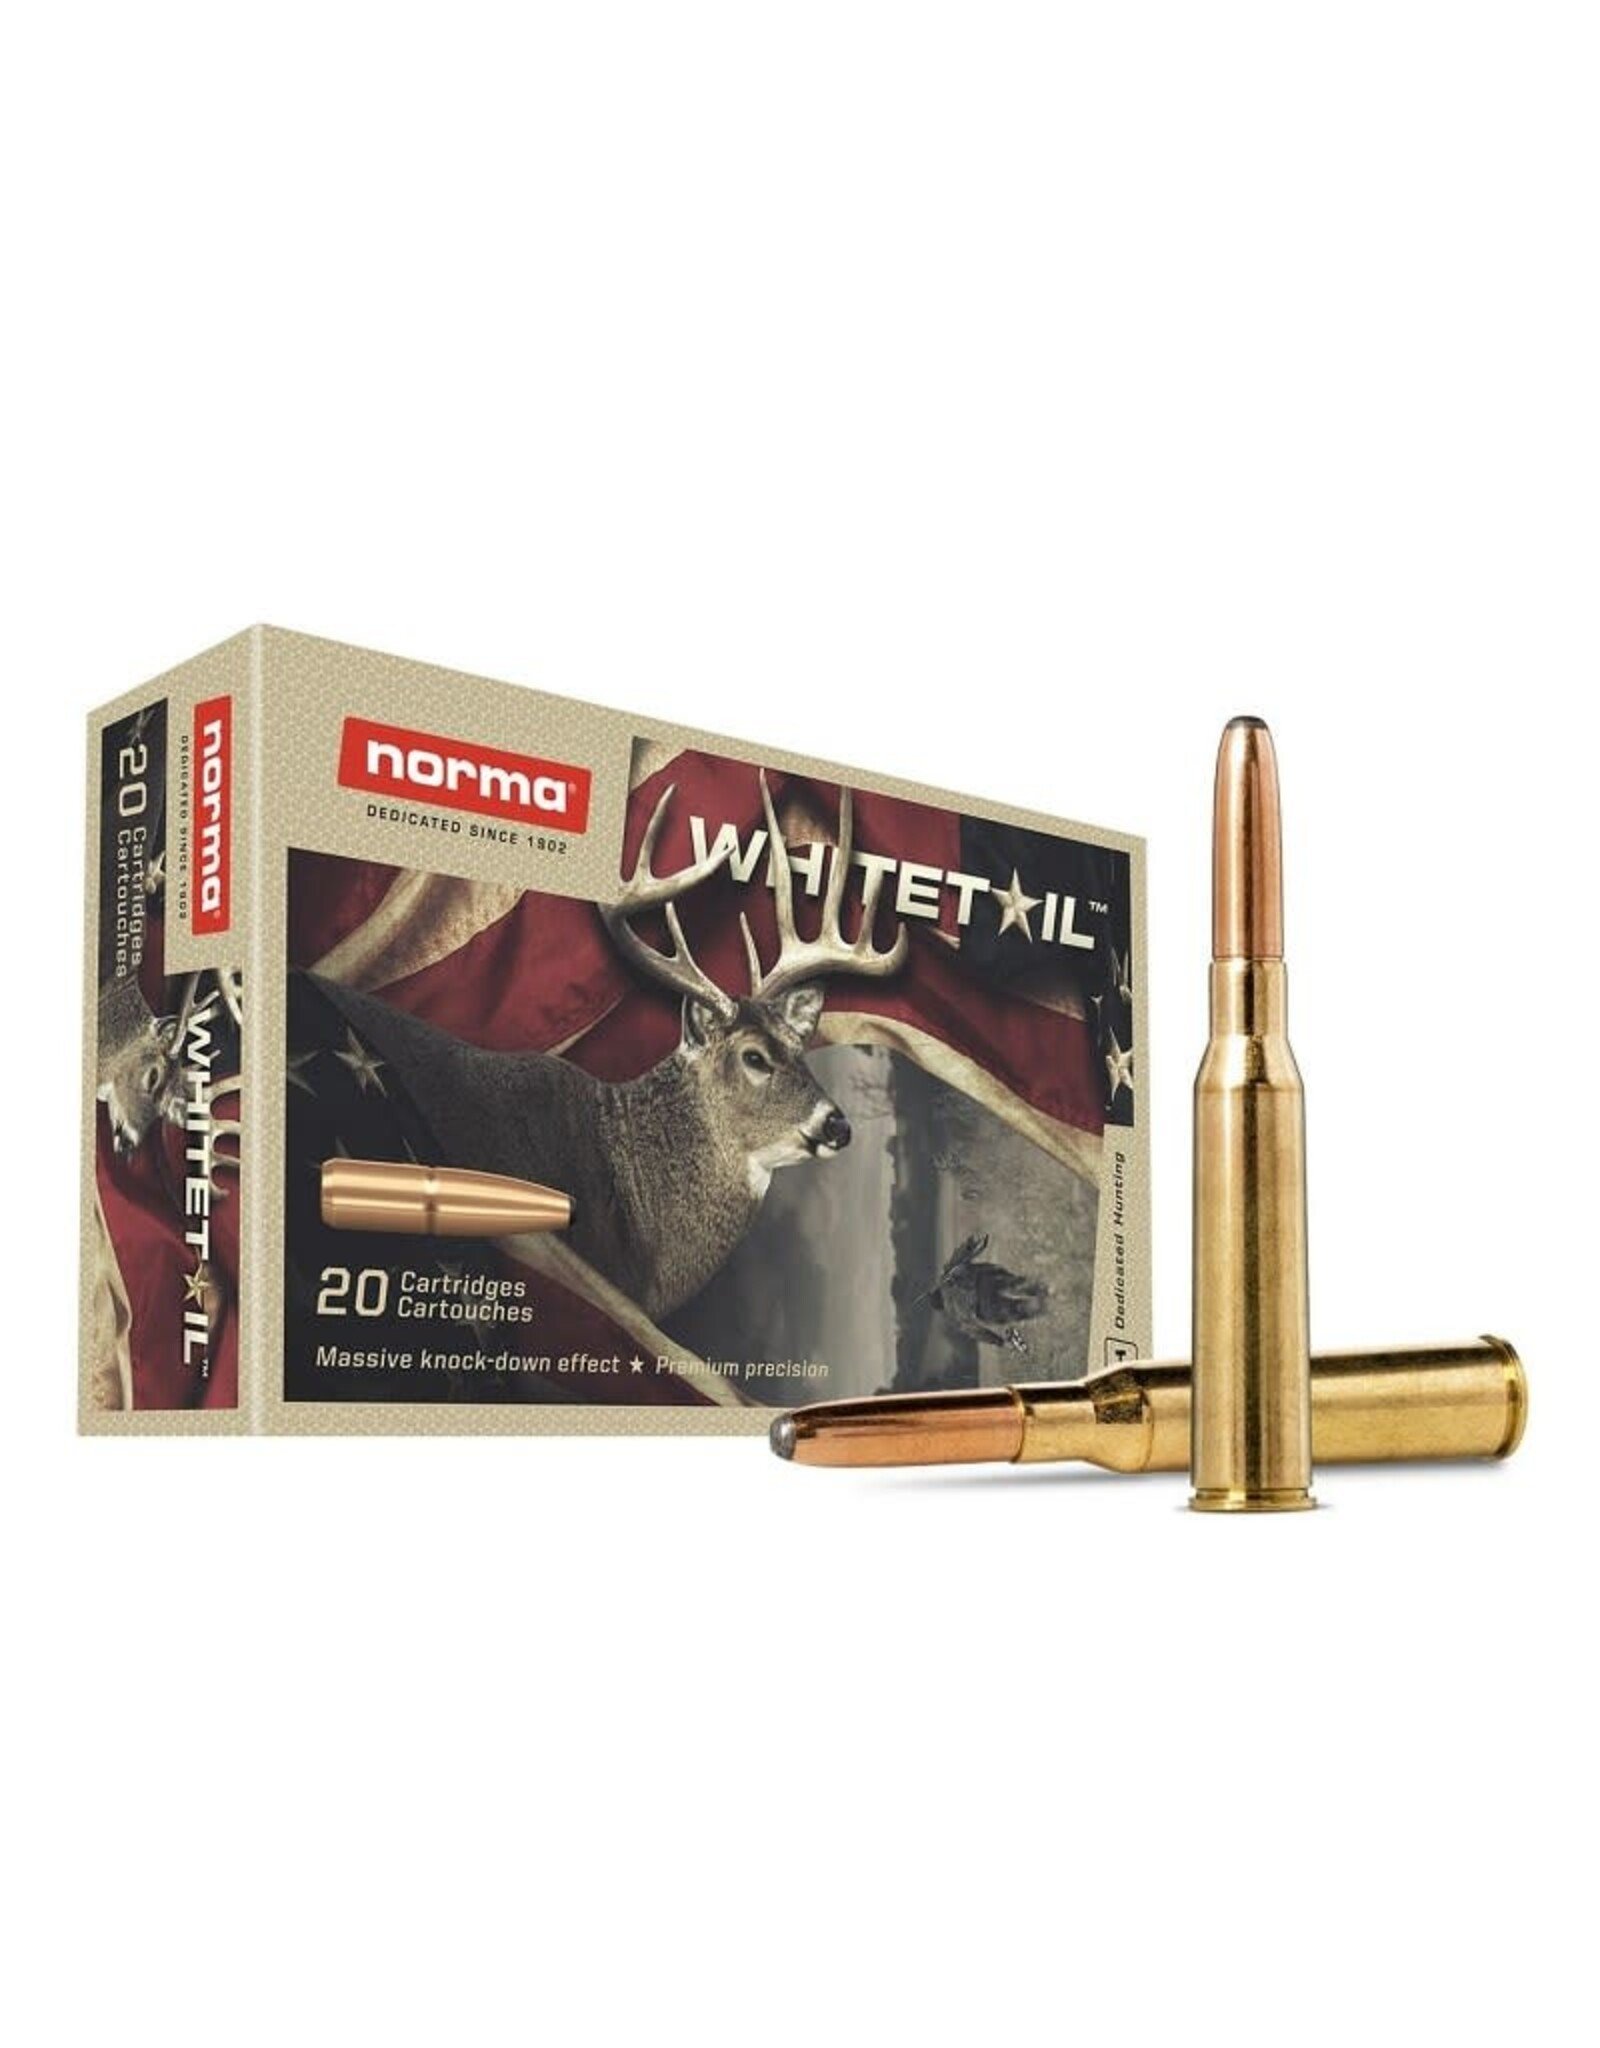 Norma Whitetail 6.5x55 Sweed 156 Gr Pointed SP - 20 Count